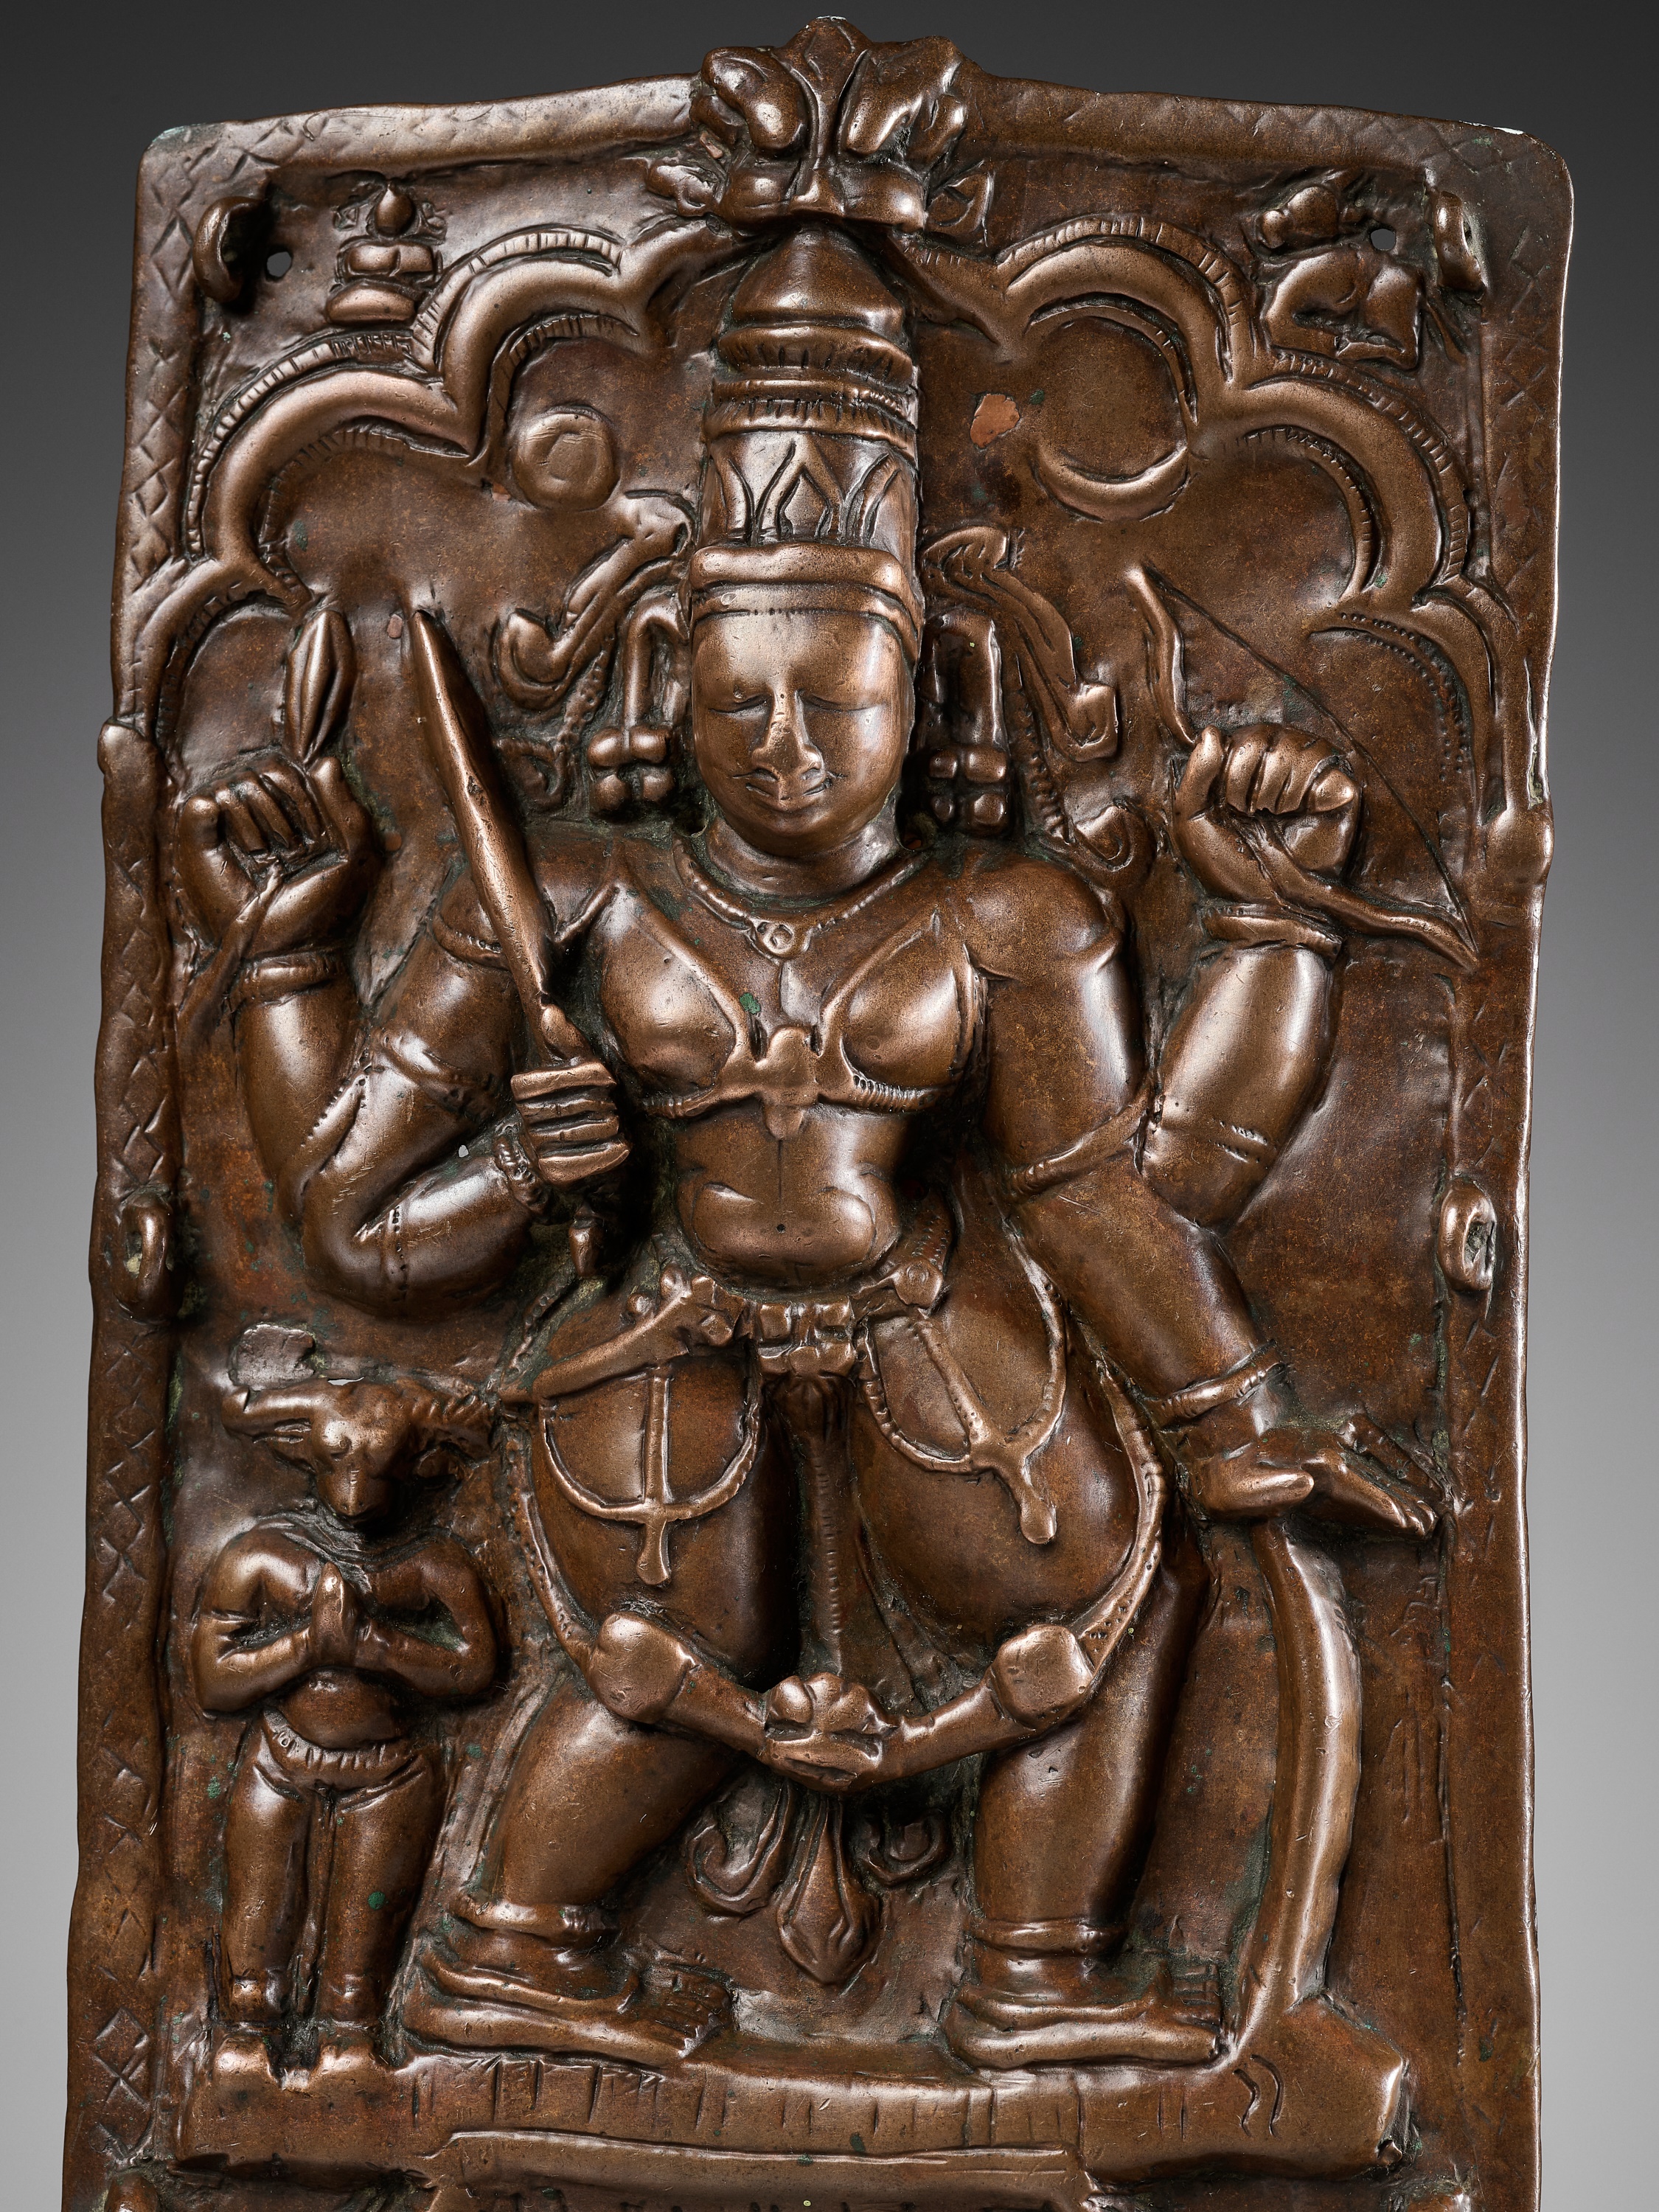 A CEREMONIAL COPPER SHIELD DEPICTING VIRABHADRA, 17TH-18TH CENTURY - Image 2 of 9